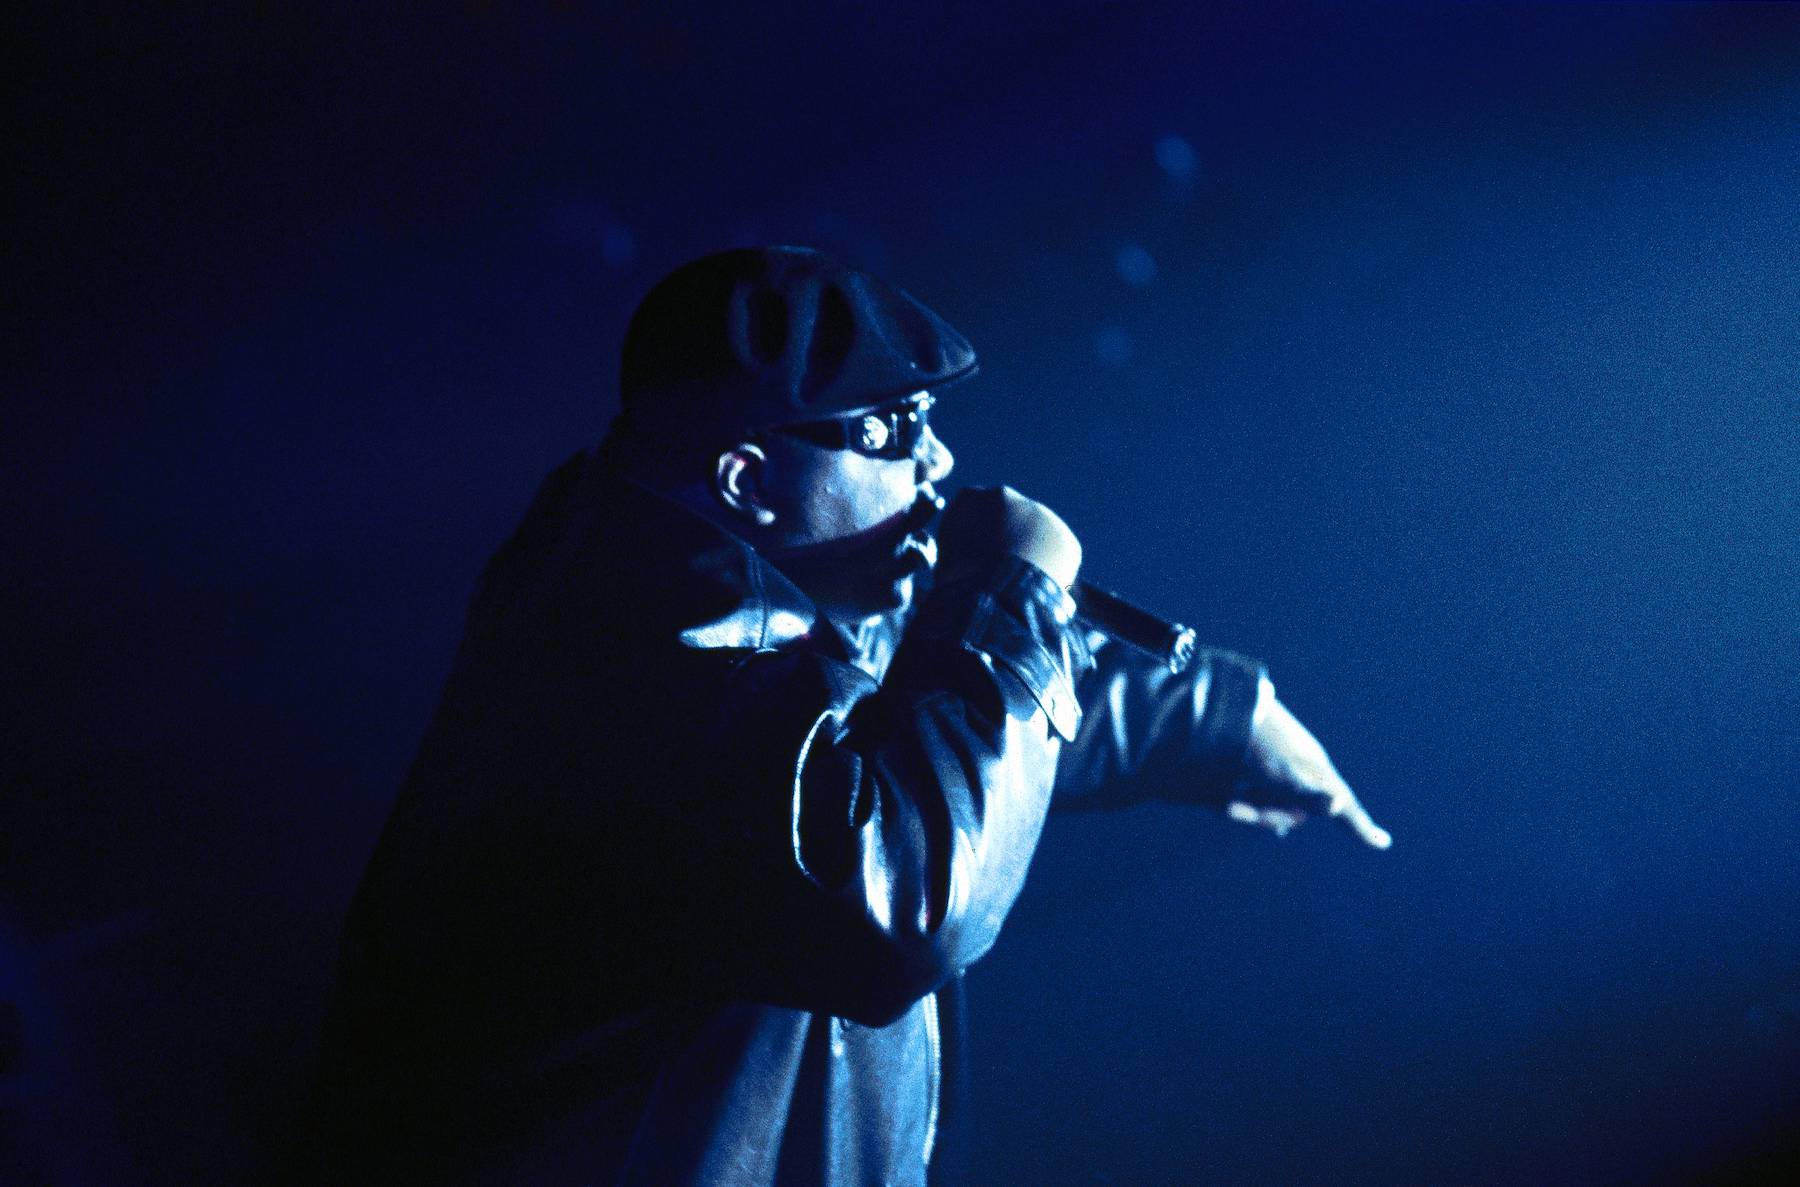 The Notorious B.I.G., rapper of 'Big Poppa,' performing on stage